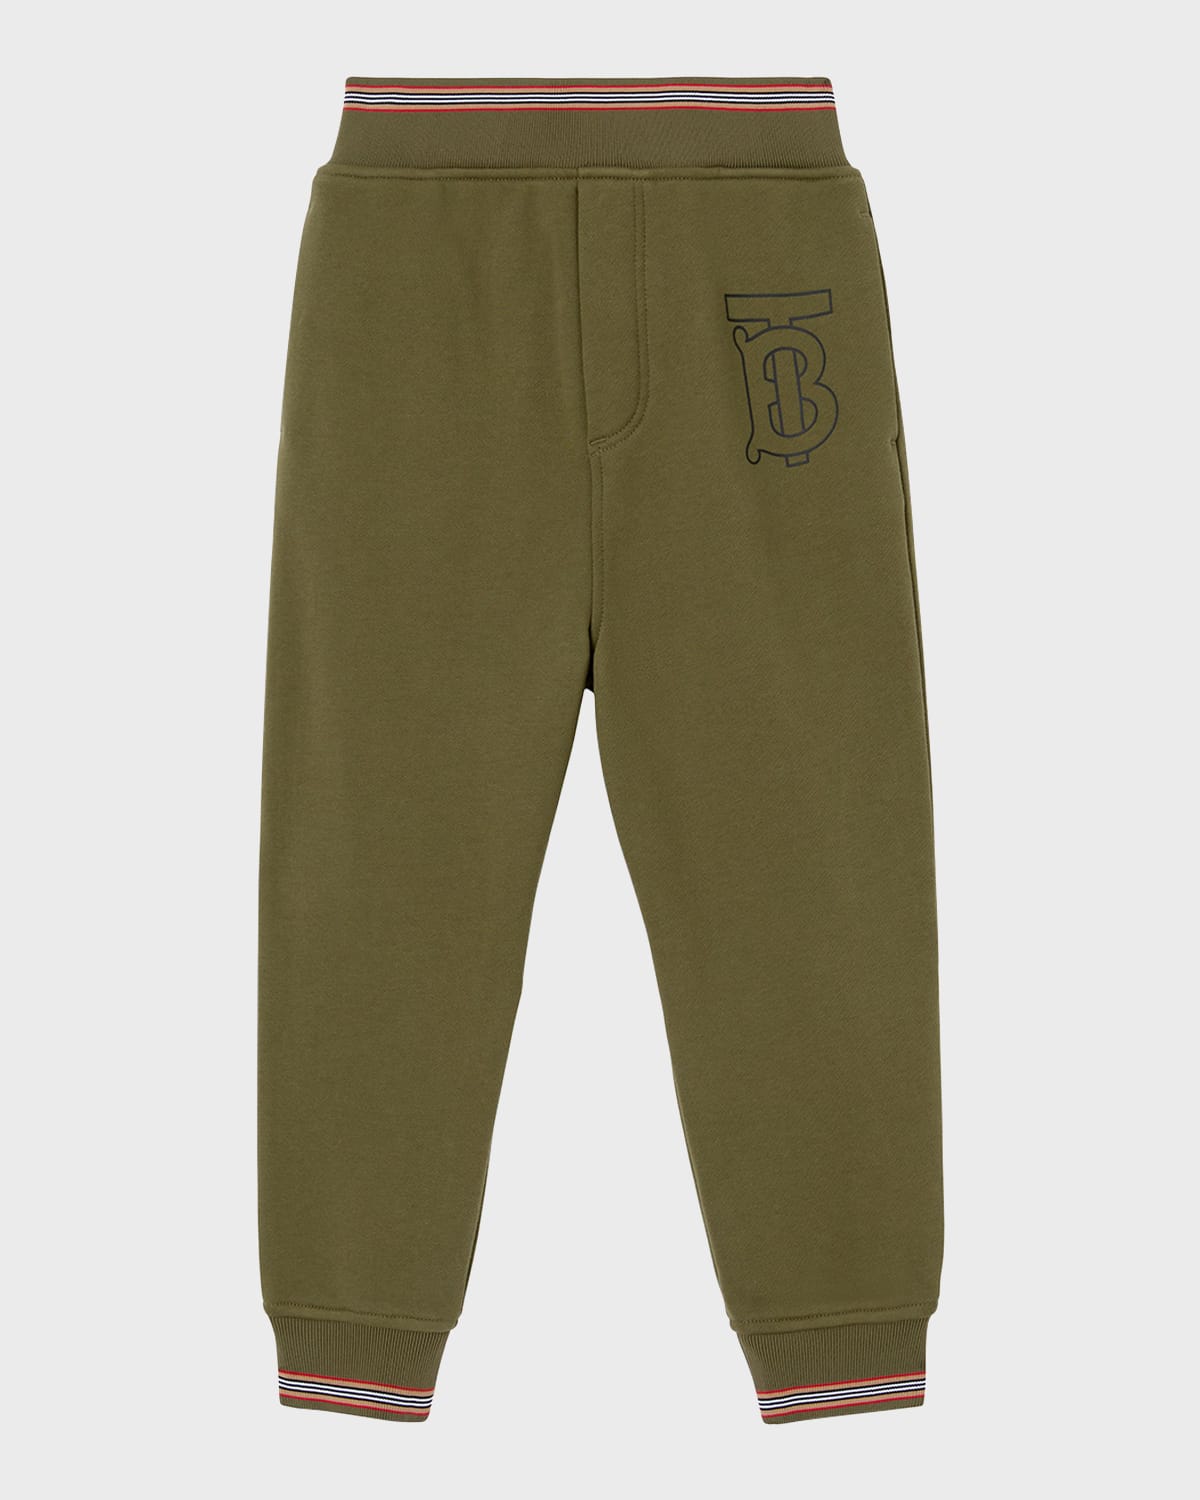 BURBERRY BOY'S LESTER EMBROIDERED MONOGRAM JOGGERS